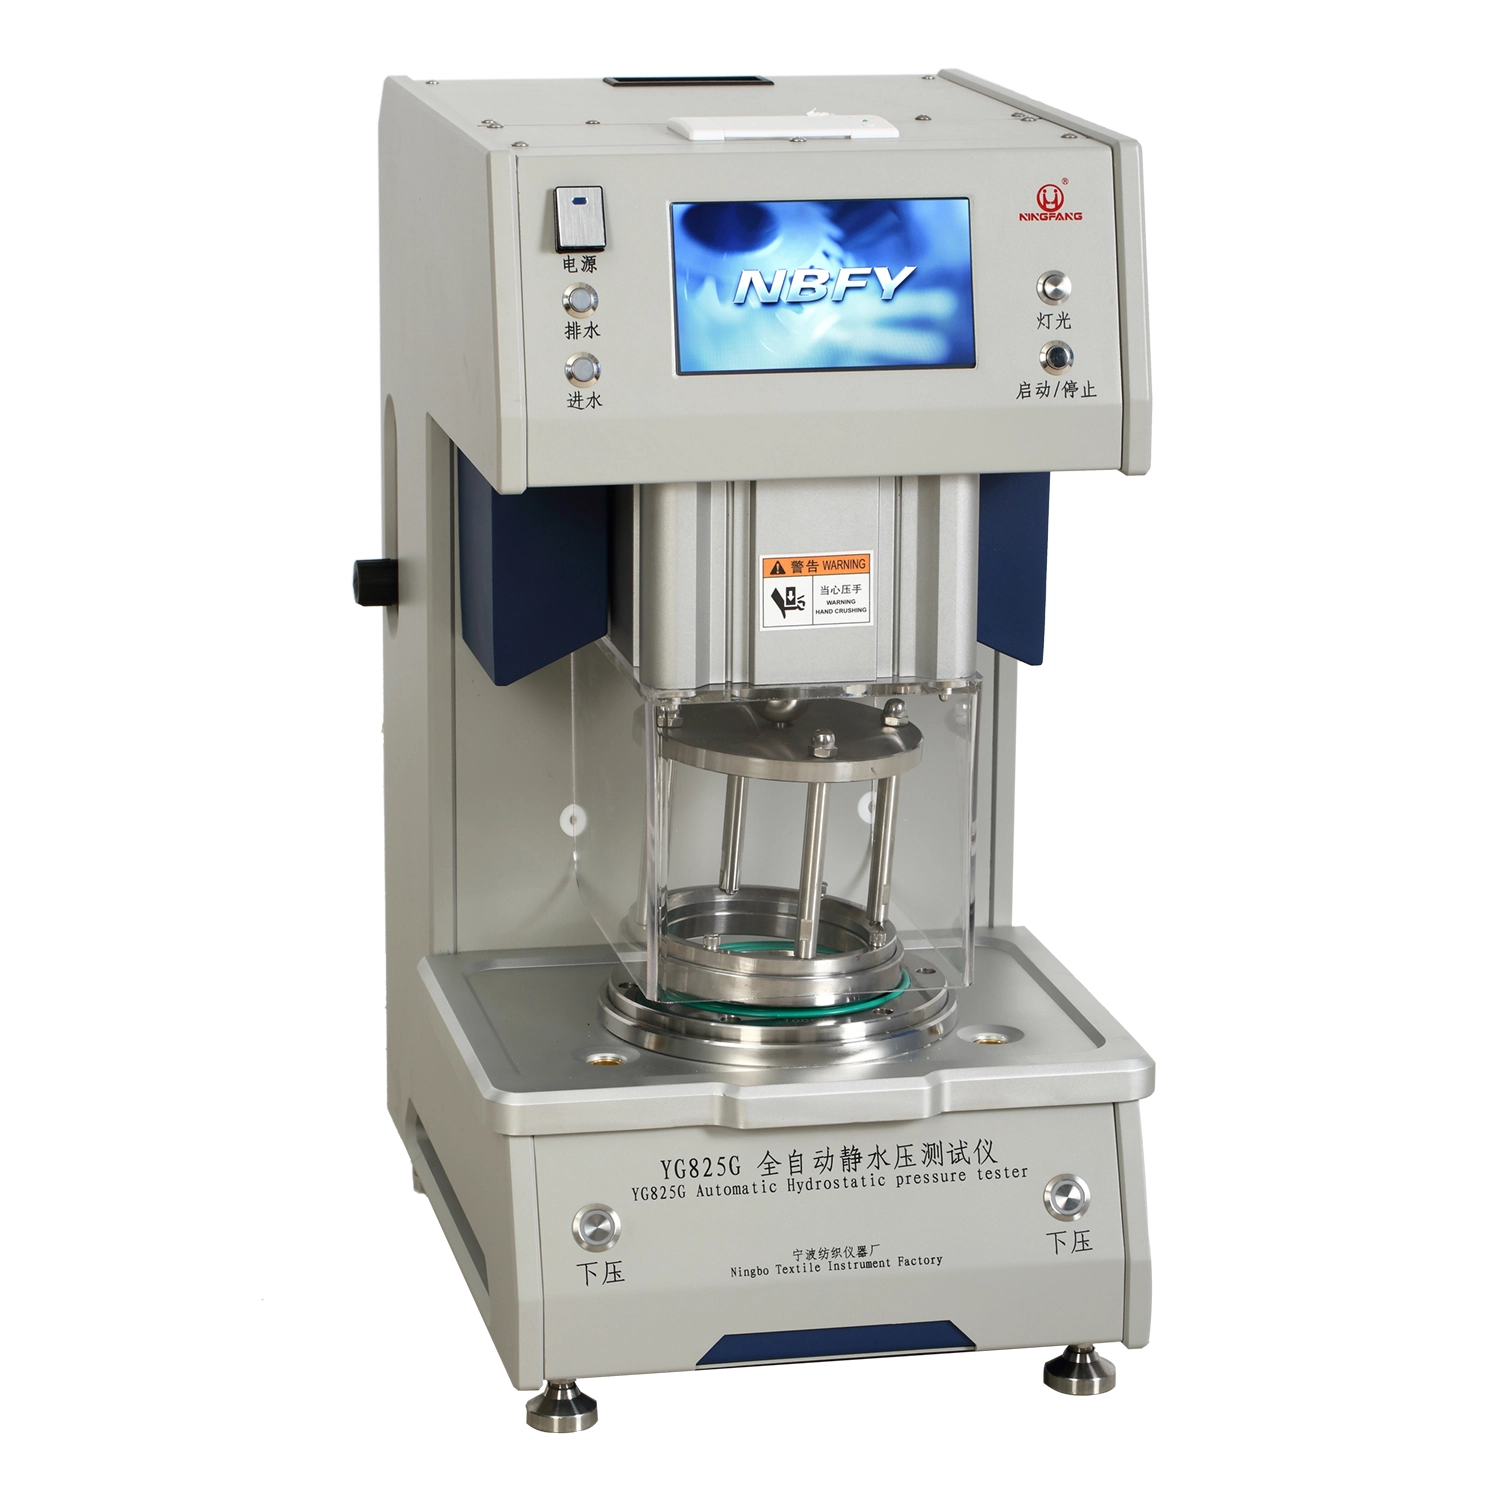 High-Quality Fabric Hydrostatic Pressure Tester Upgrade: How to Help Industrial Innovation